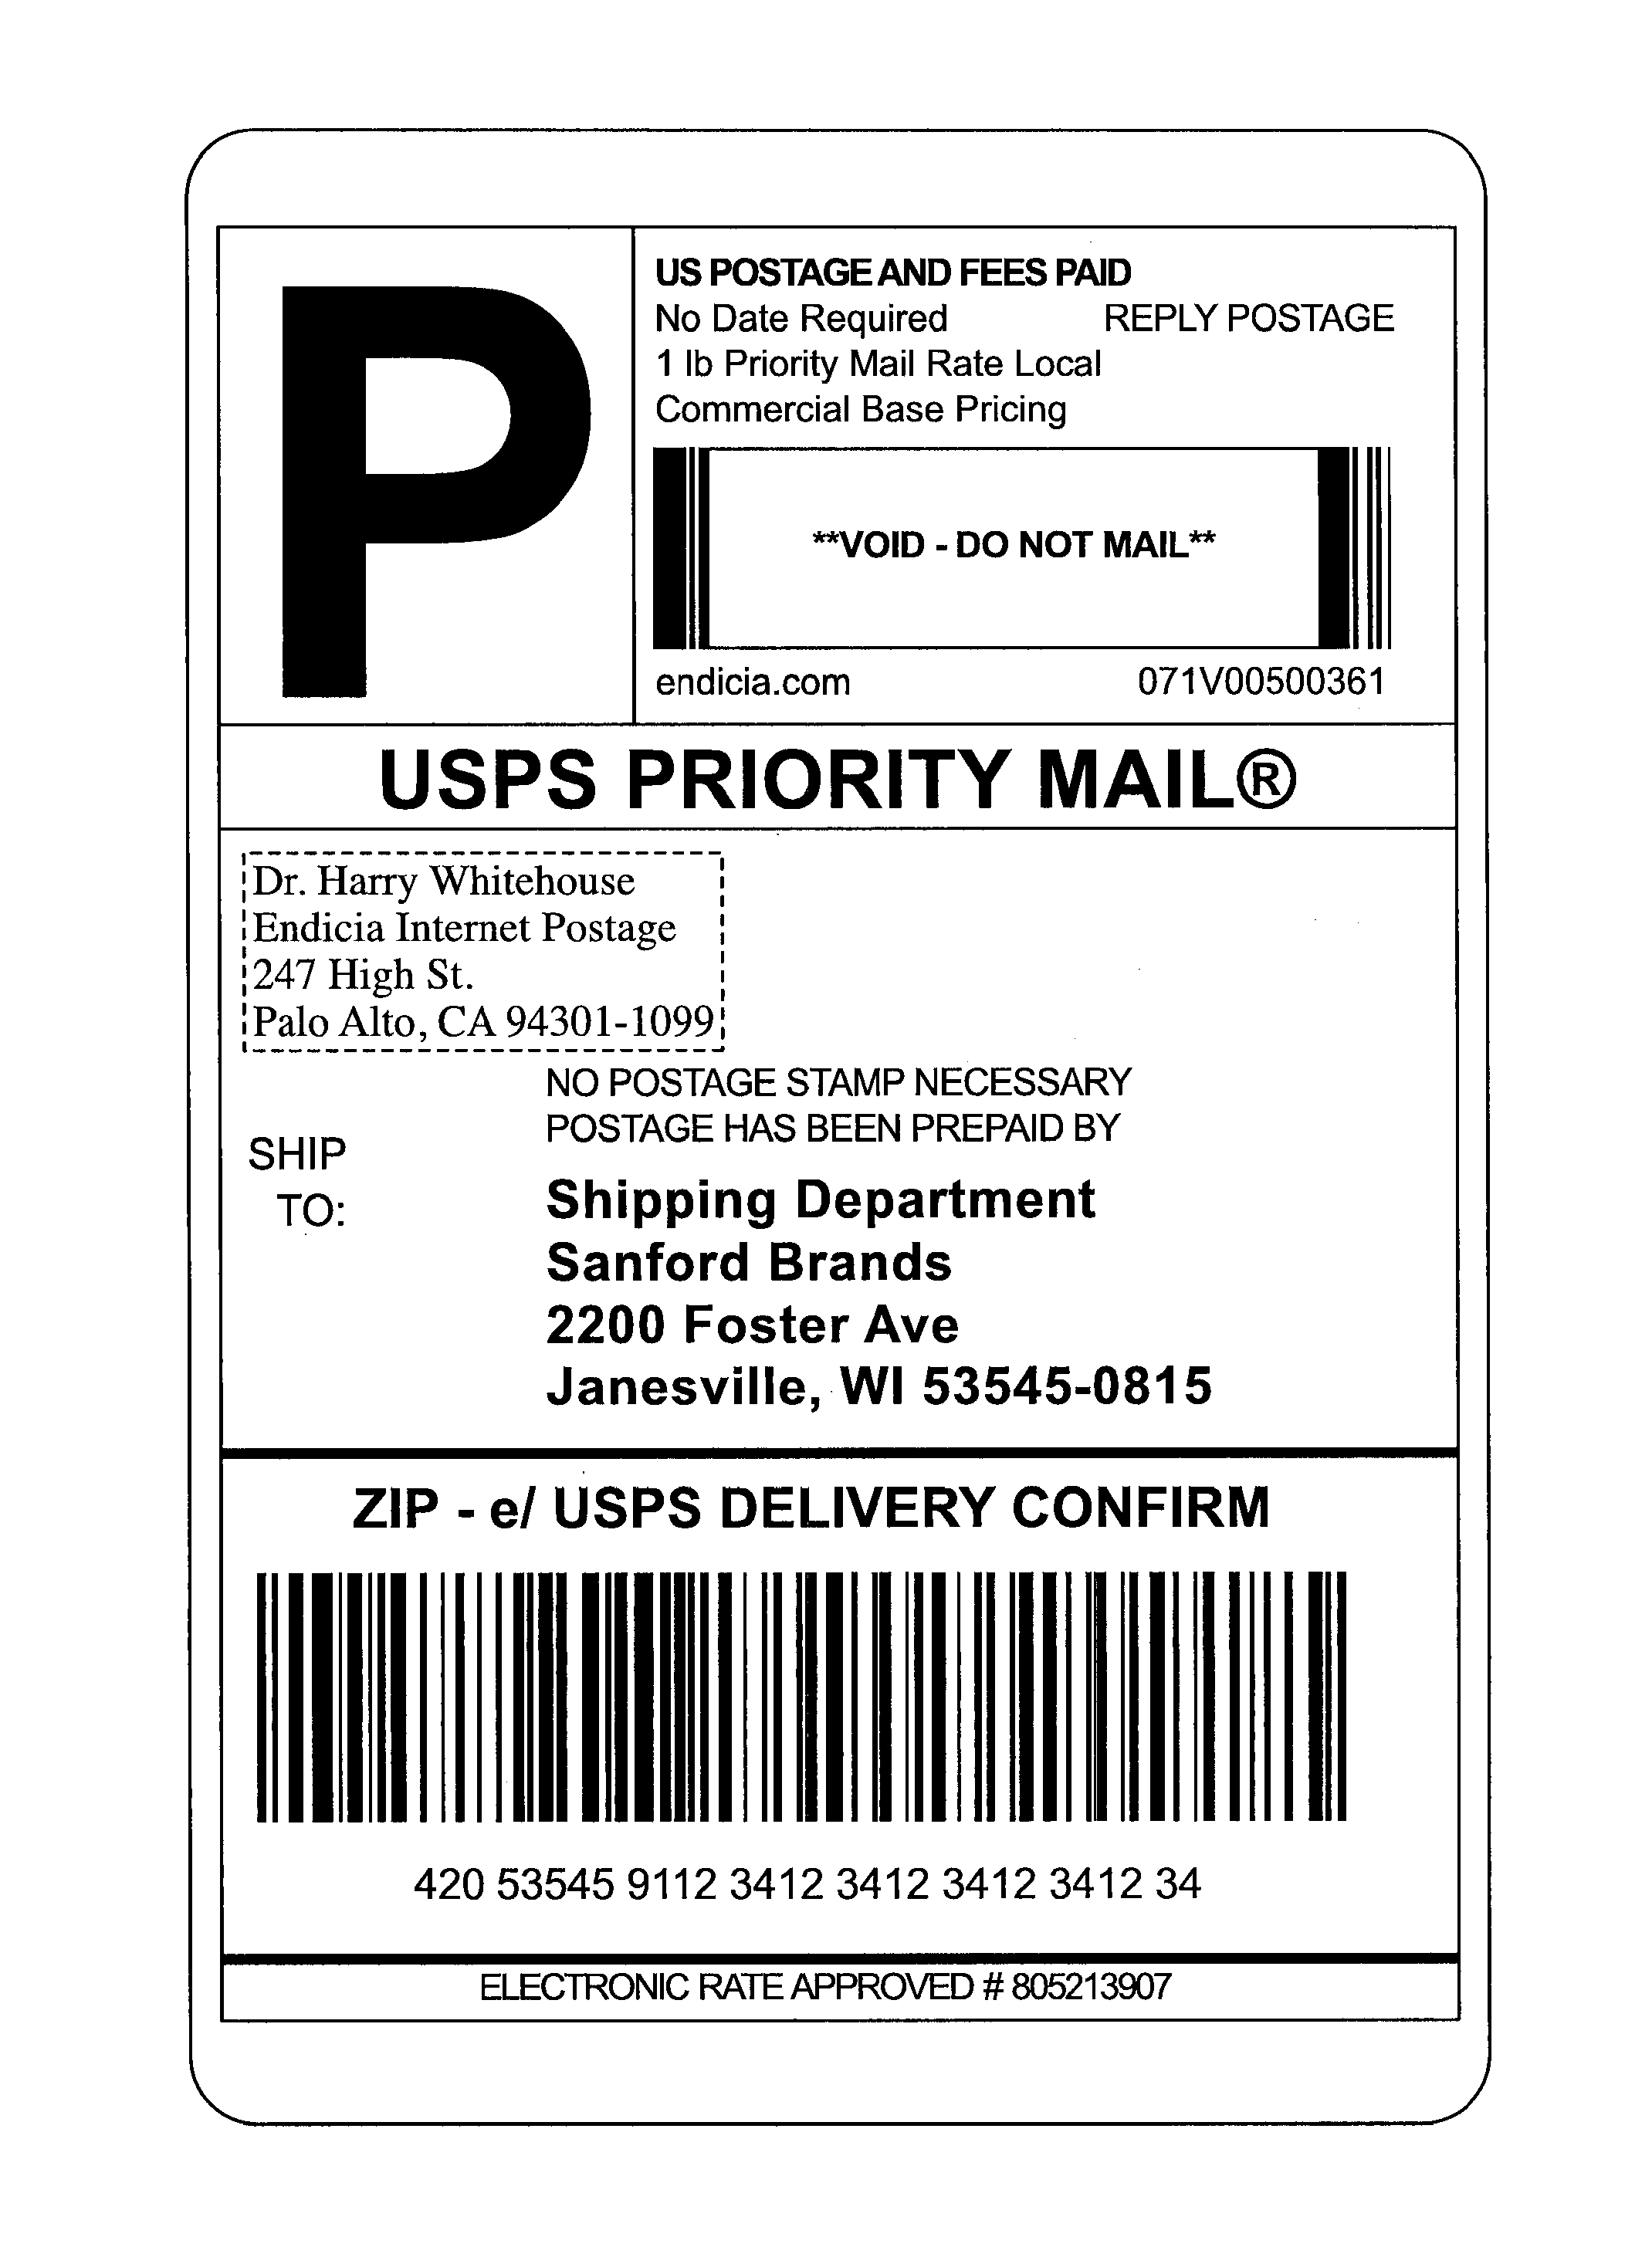 Shipping Label Sample - safaslens With Regard To Usps Shipping Label Template Download